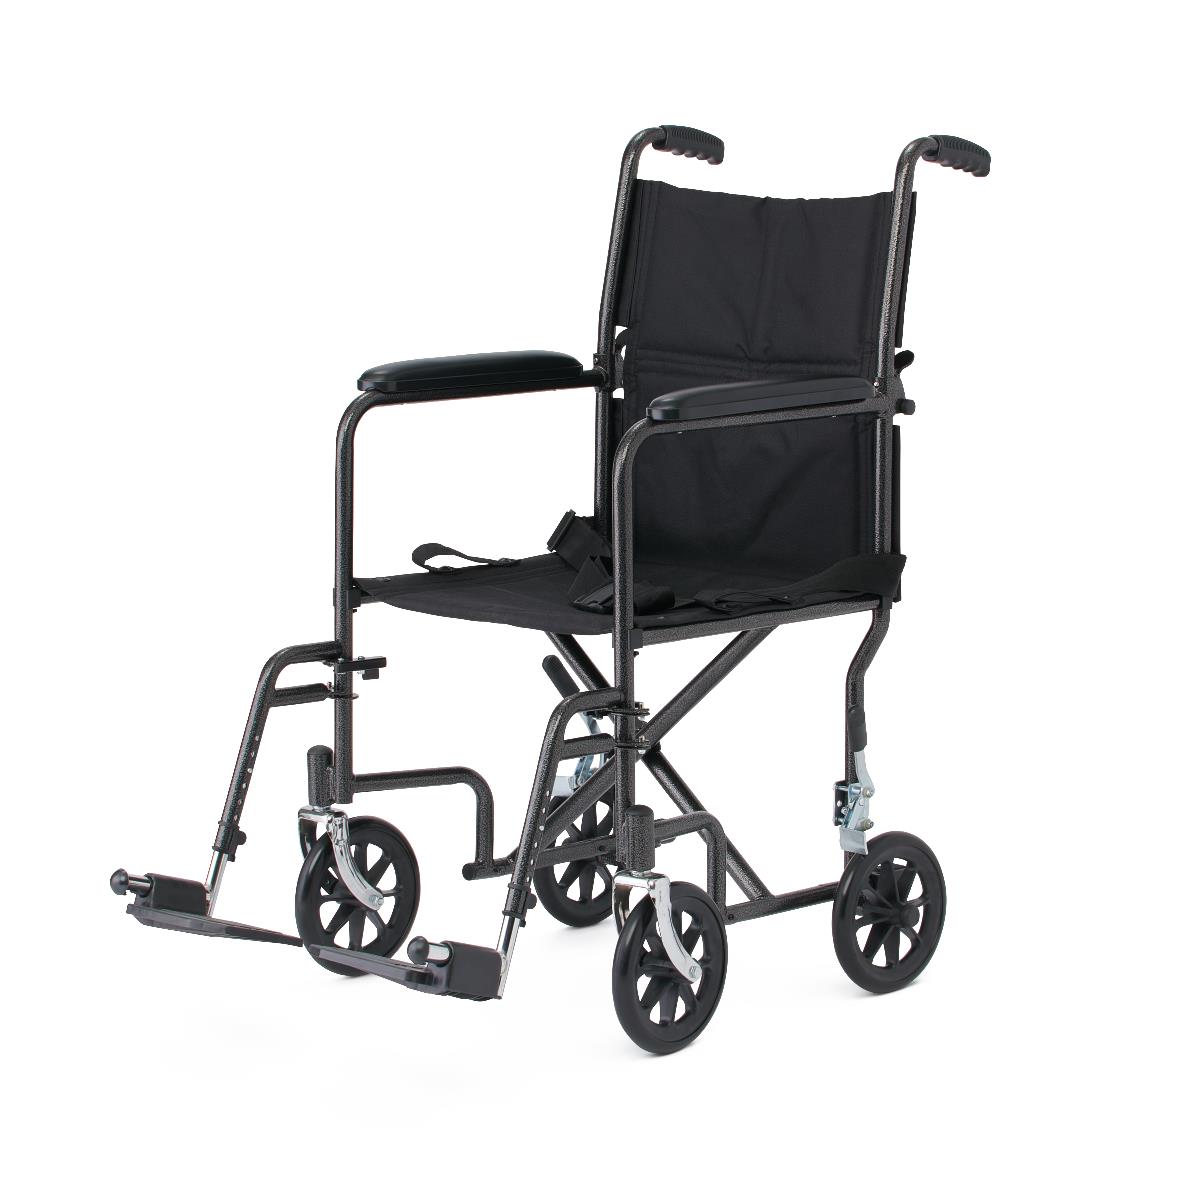 Medline Steel Transport Chair with 8 inch wheels (MDS808200)